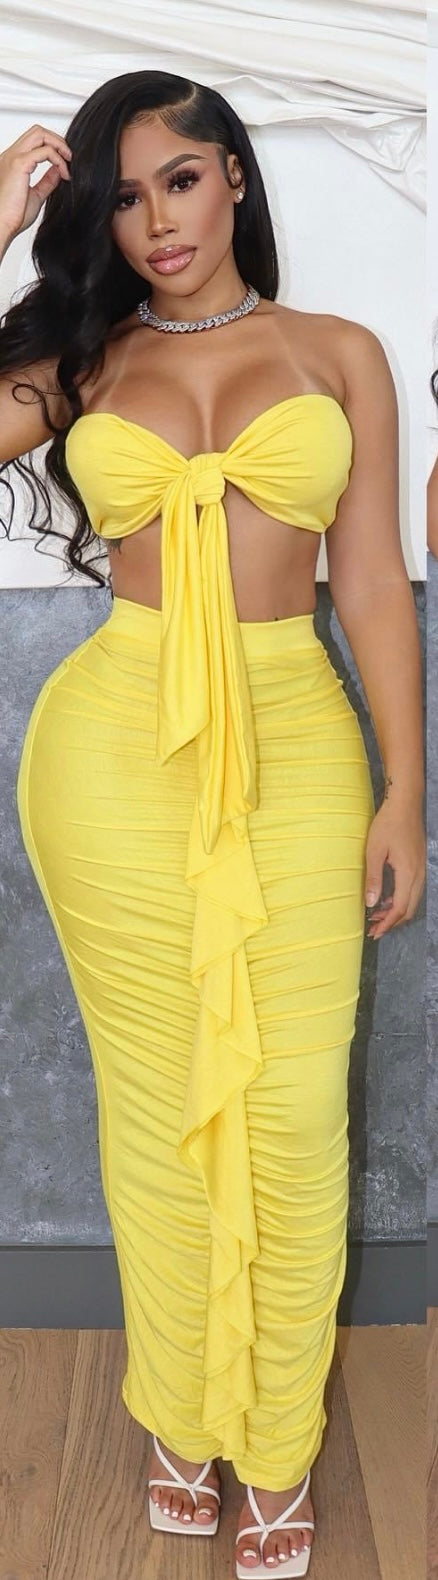 Two piece set Crop top Strapless Self tie closure High waisted skirt Elastic waistband Ruched Ruffles No closure